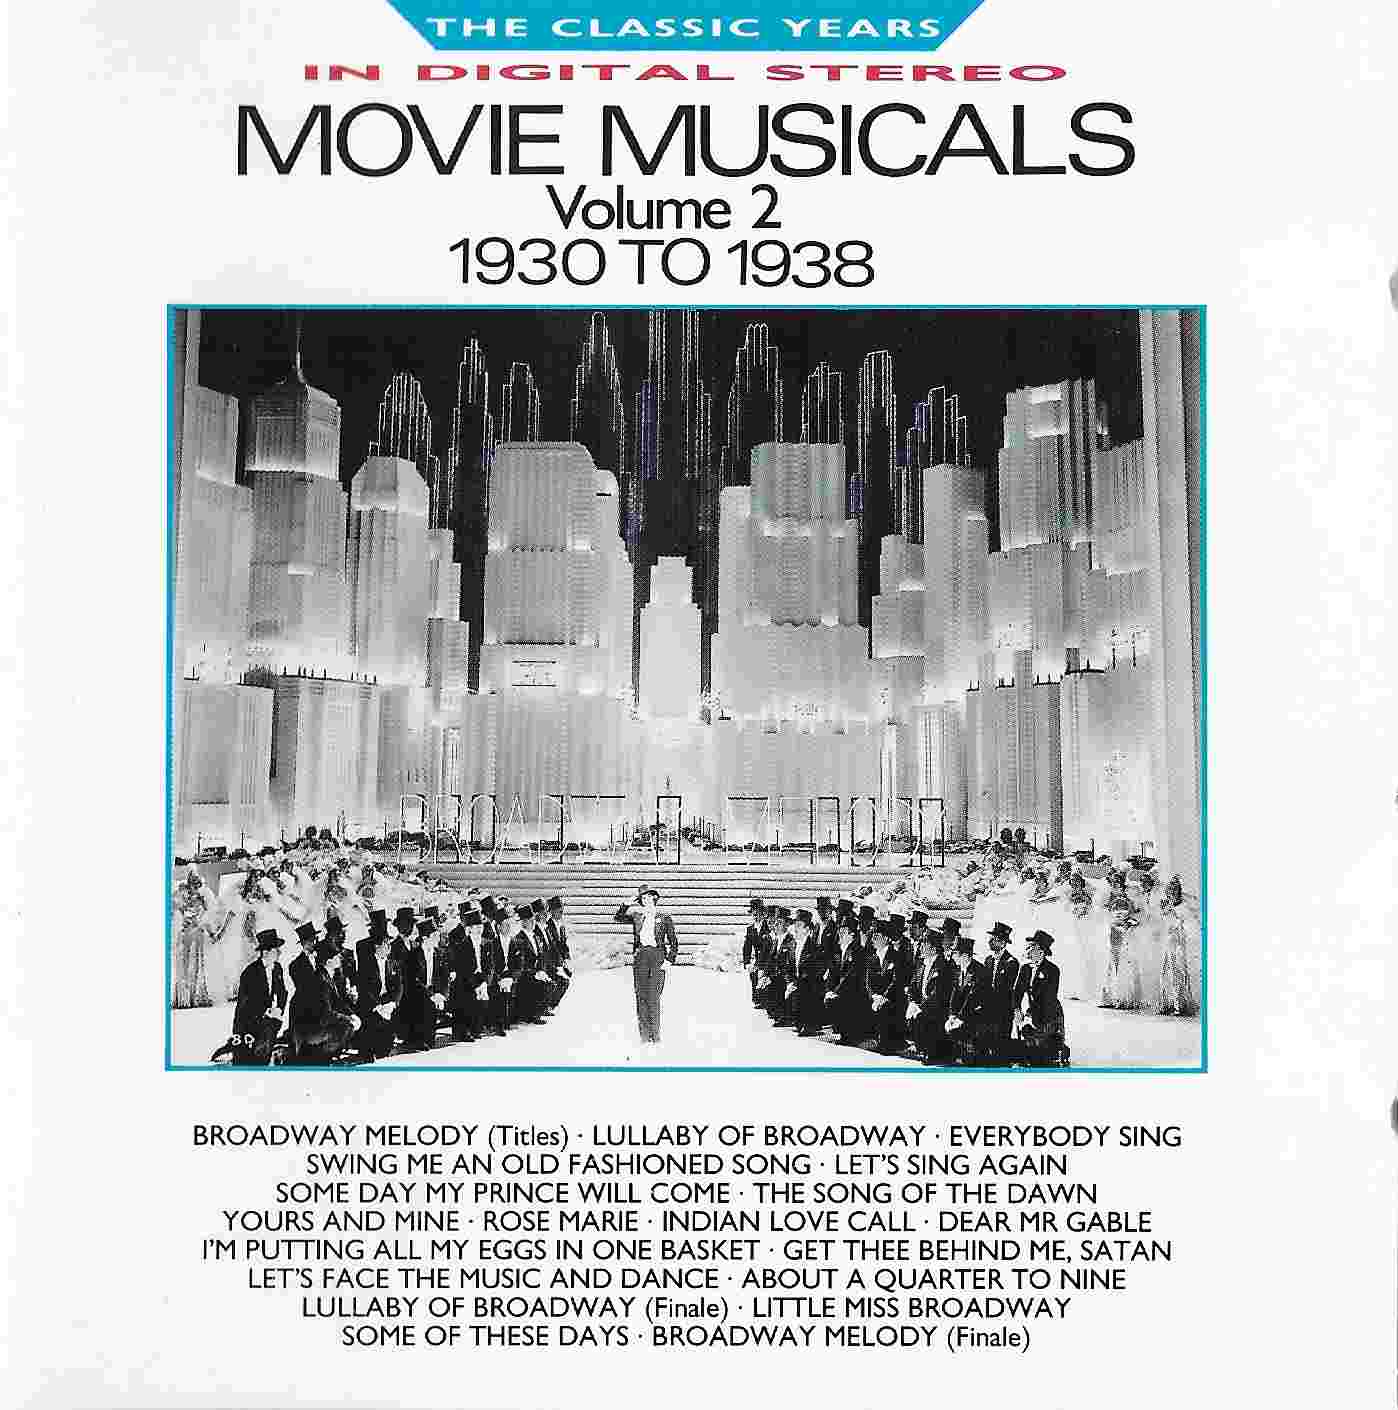 Picture of Classic years - Movie musicals 1930 - 1938 by artist Various from the BBC cds - Records and Tapes library